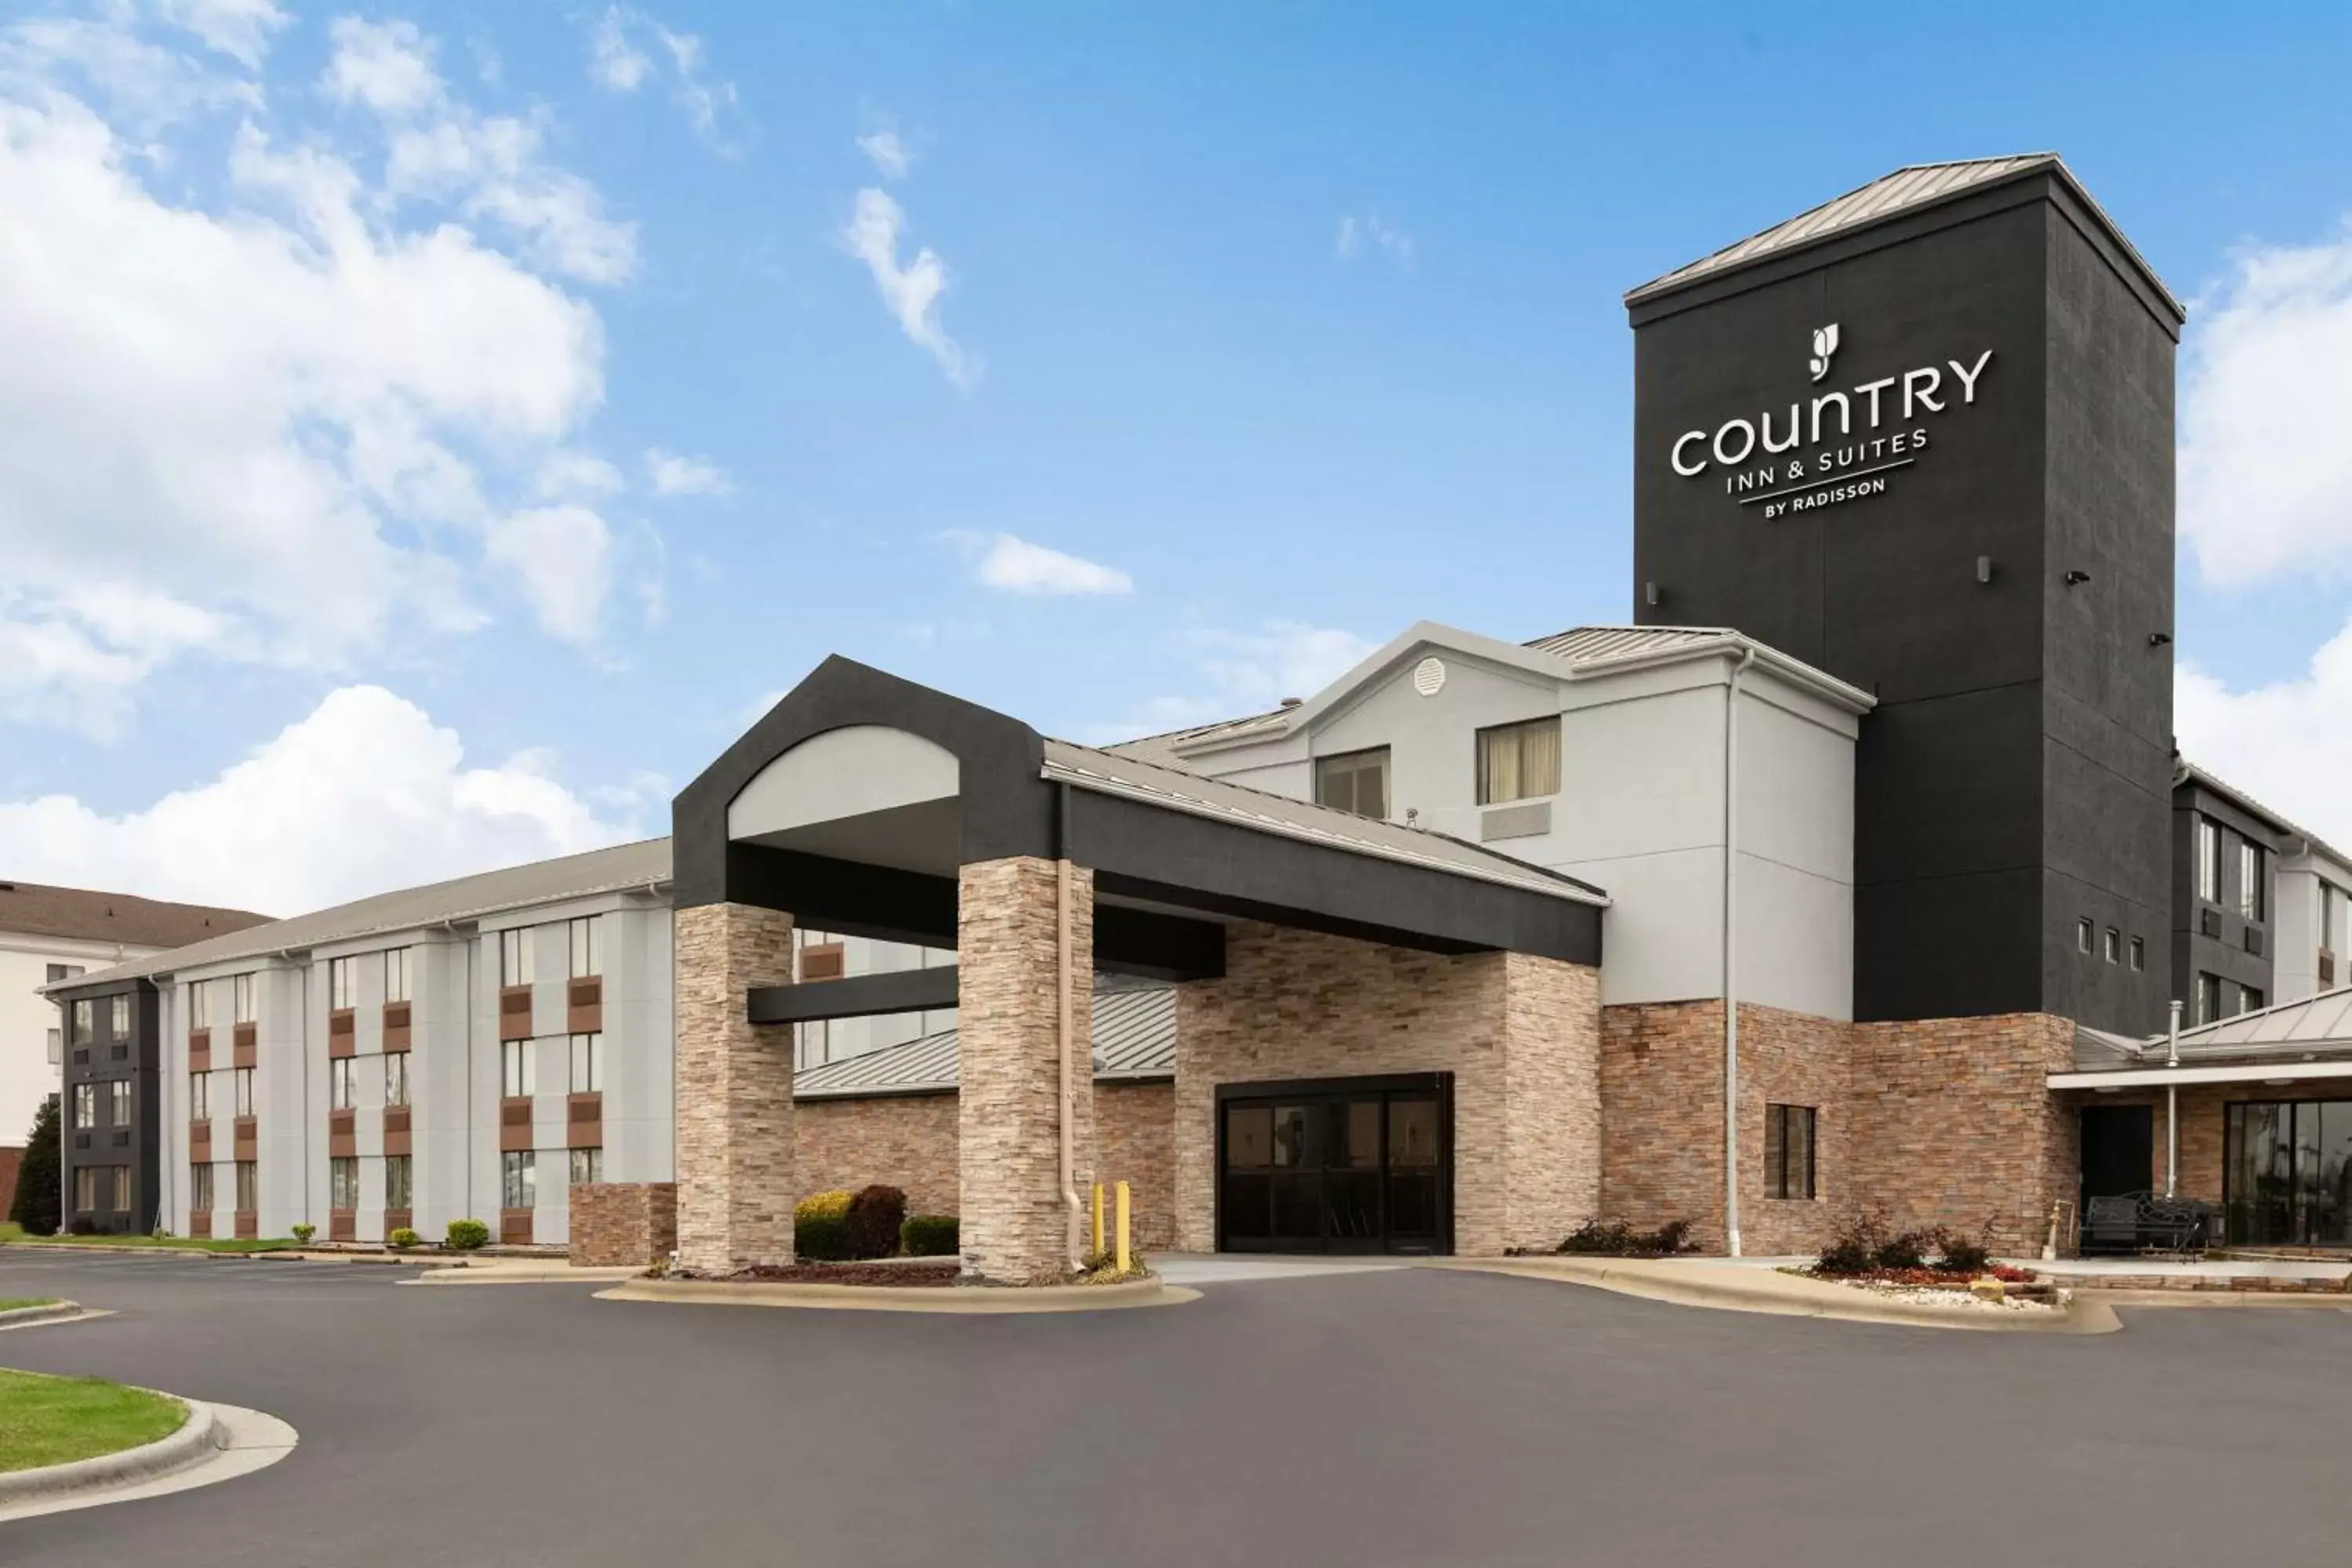 Property building in Country Inn & Suites by Radisson, Roanoke Rapids, NC